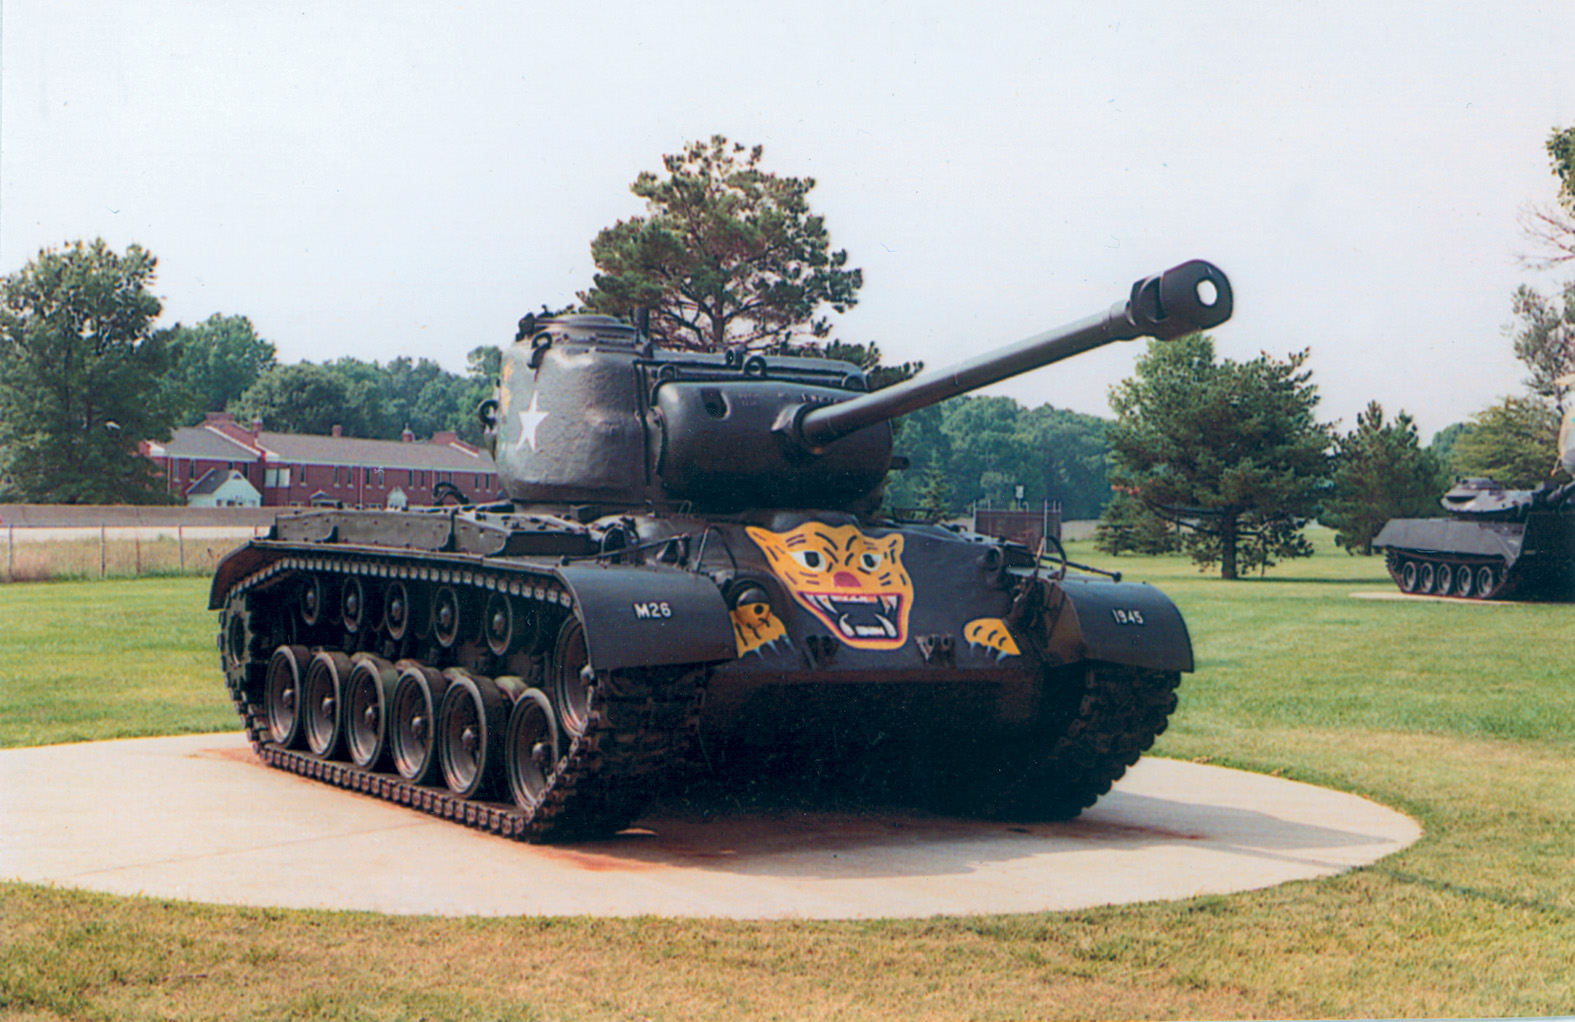 An M26 Patton tank with tiger decals. Below: The Patton Museum.